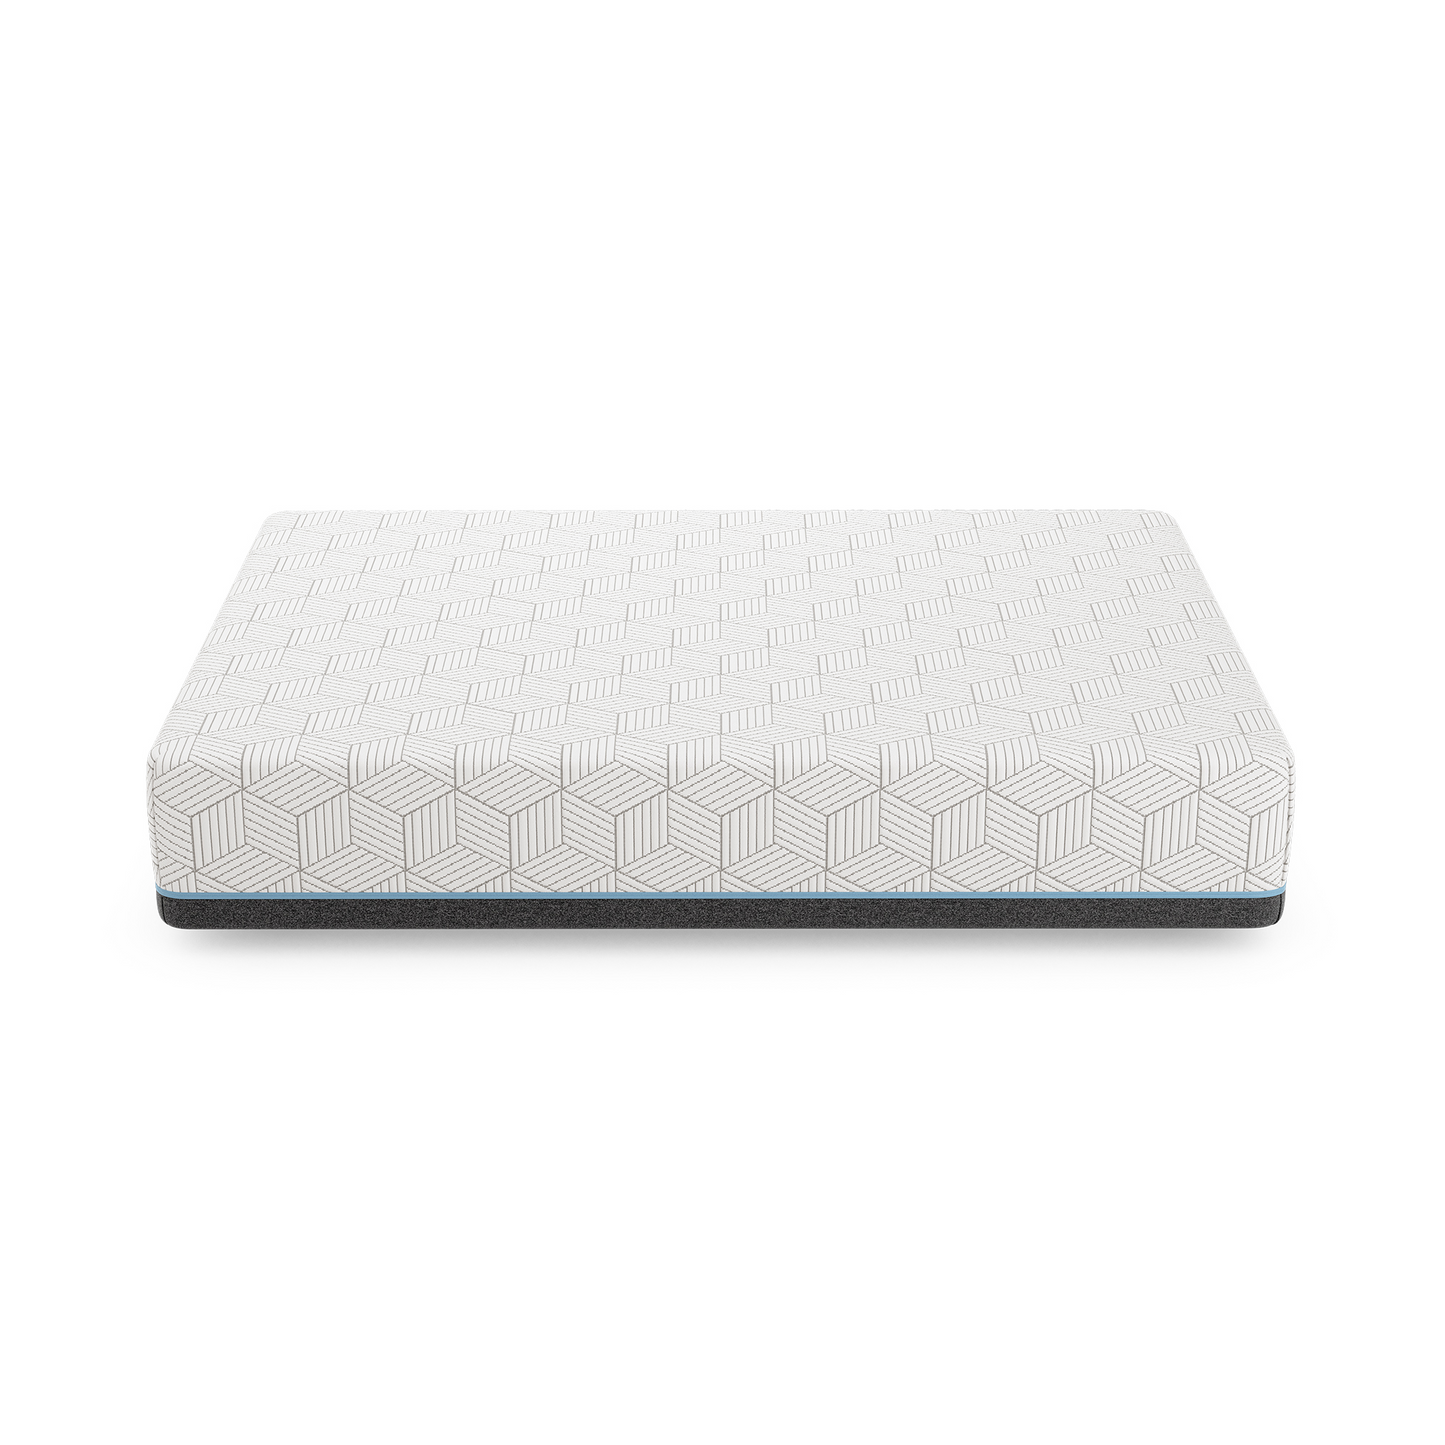 Harmony Chill 2.0 13" Memory Foam Mattress With Advanced Temperature Regulation, Side View